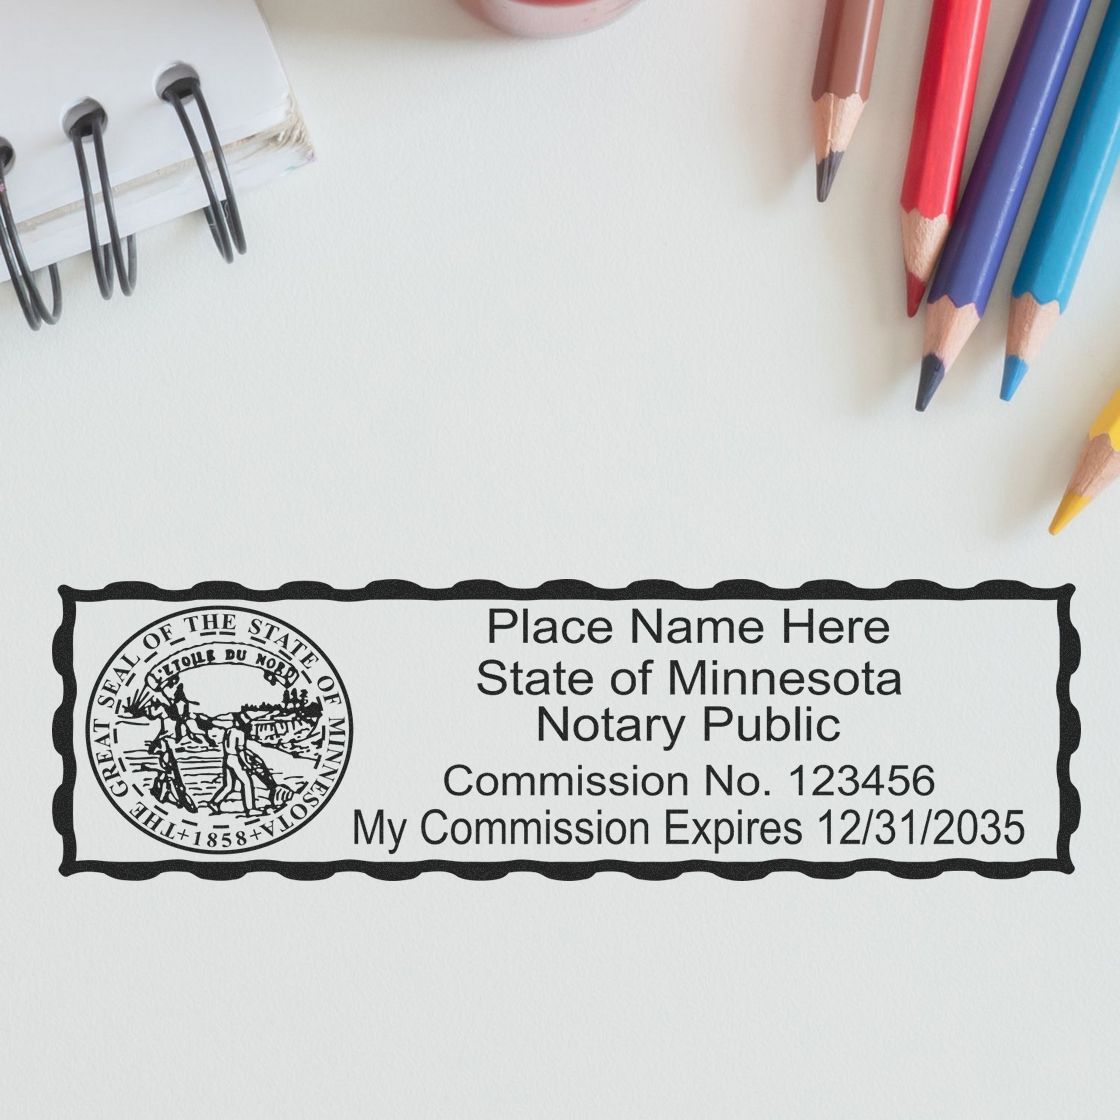 Another Example of a stamped impression of the Self-Inking State Seal Minnesota Notary Stamp on a piece of office paper.